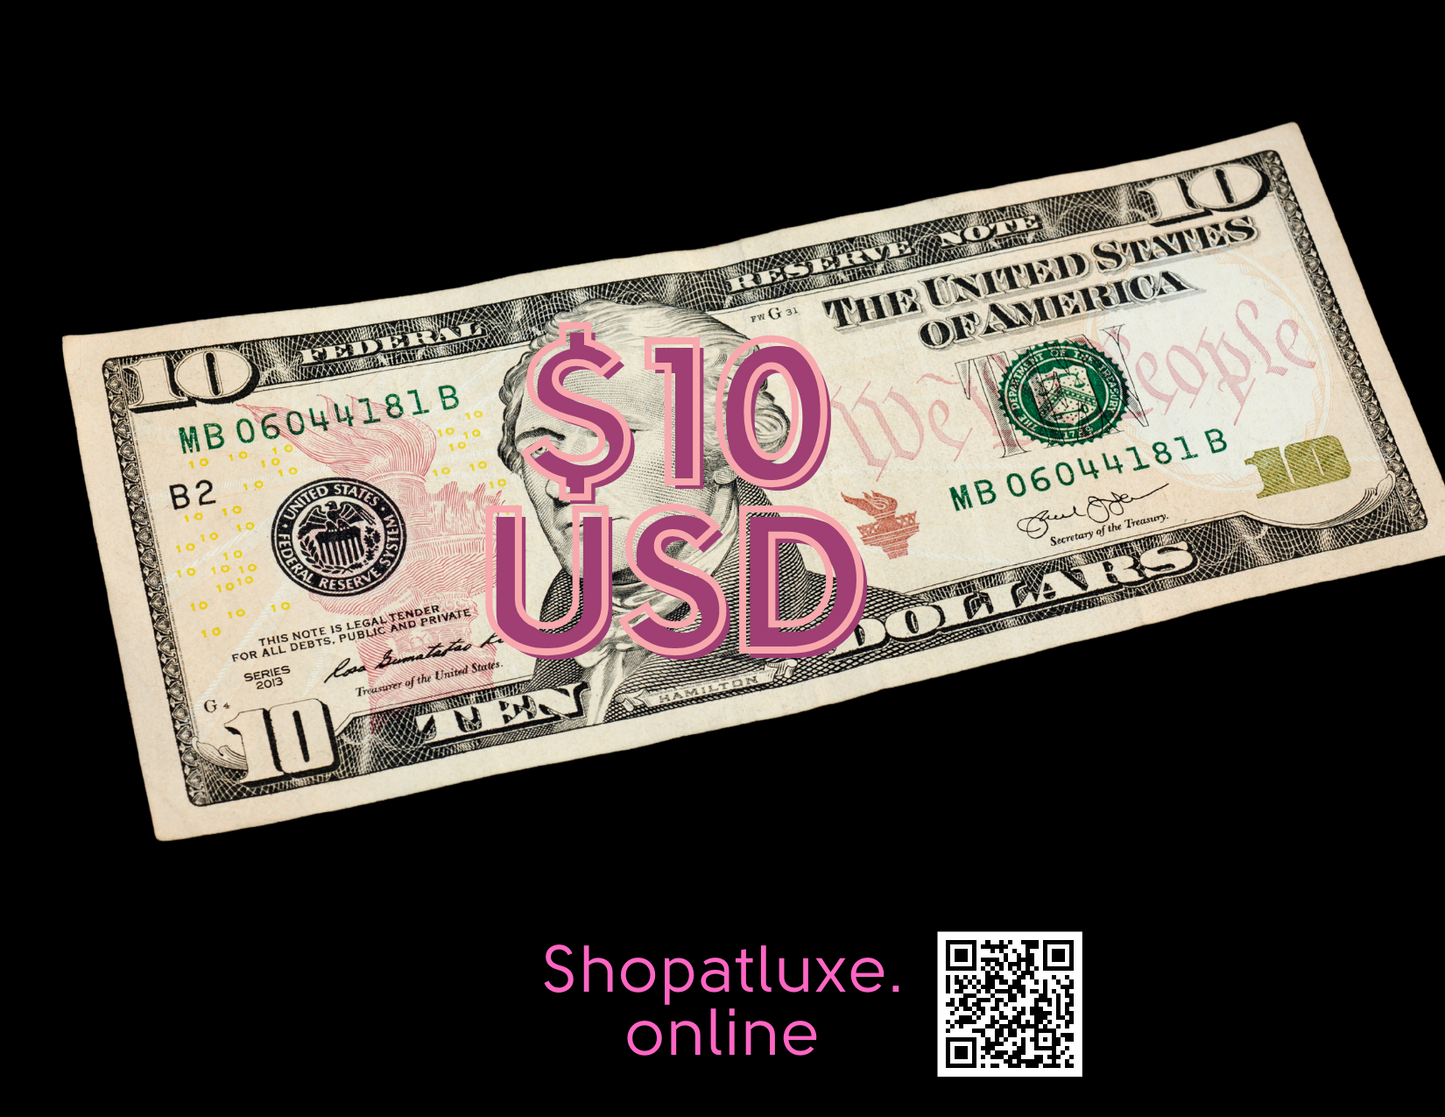 NOW ACCEPTING GIFT CARDS - Shopatluxe.Online